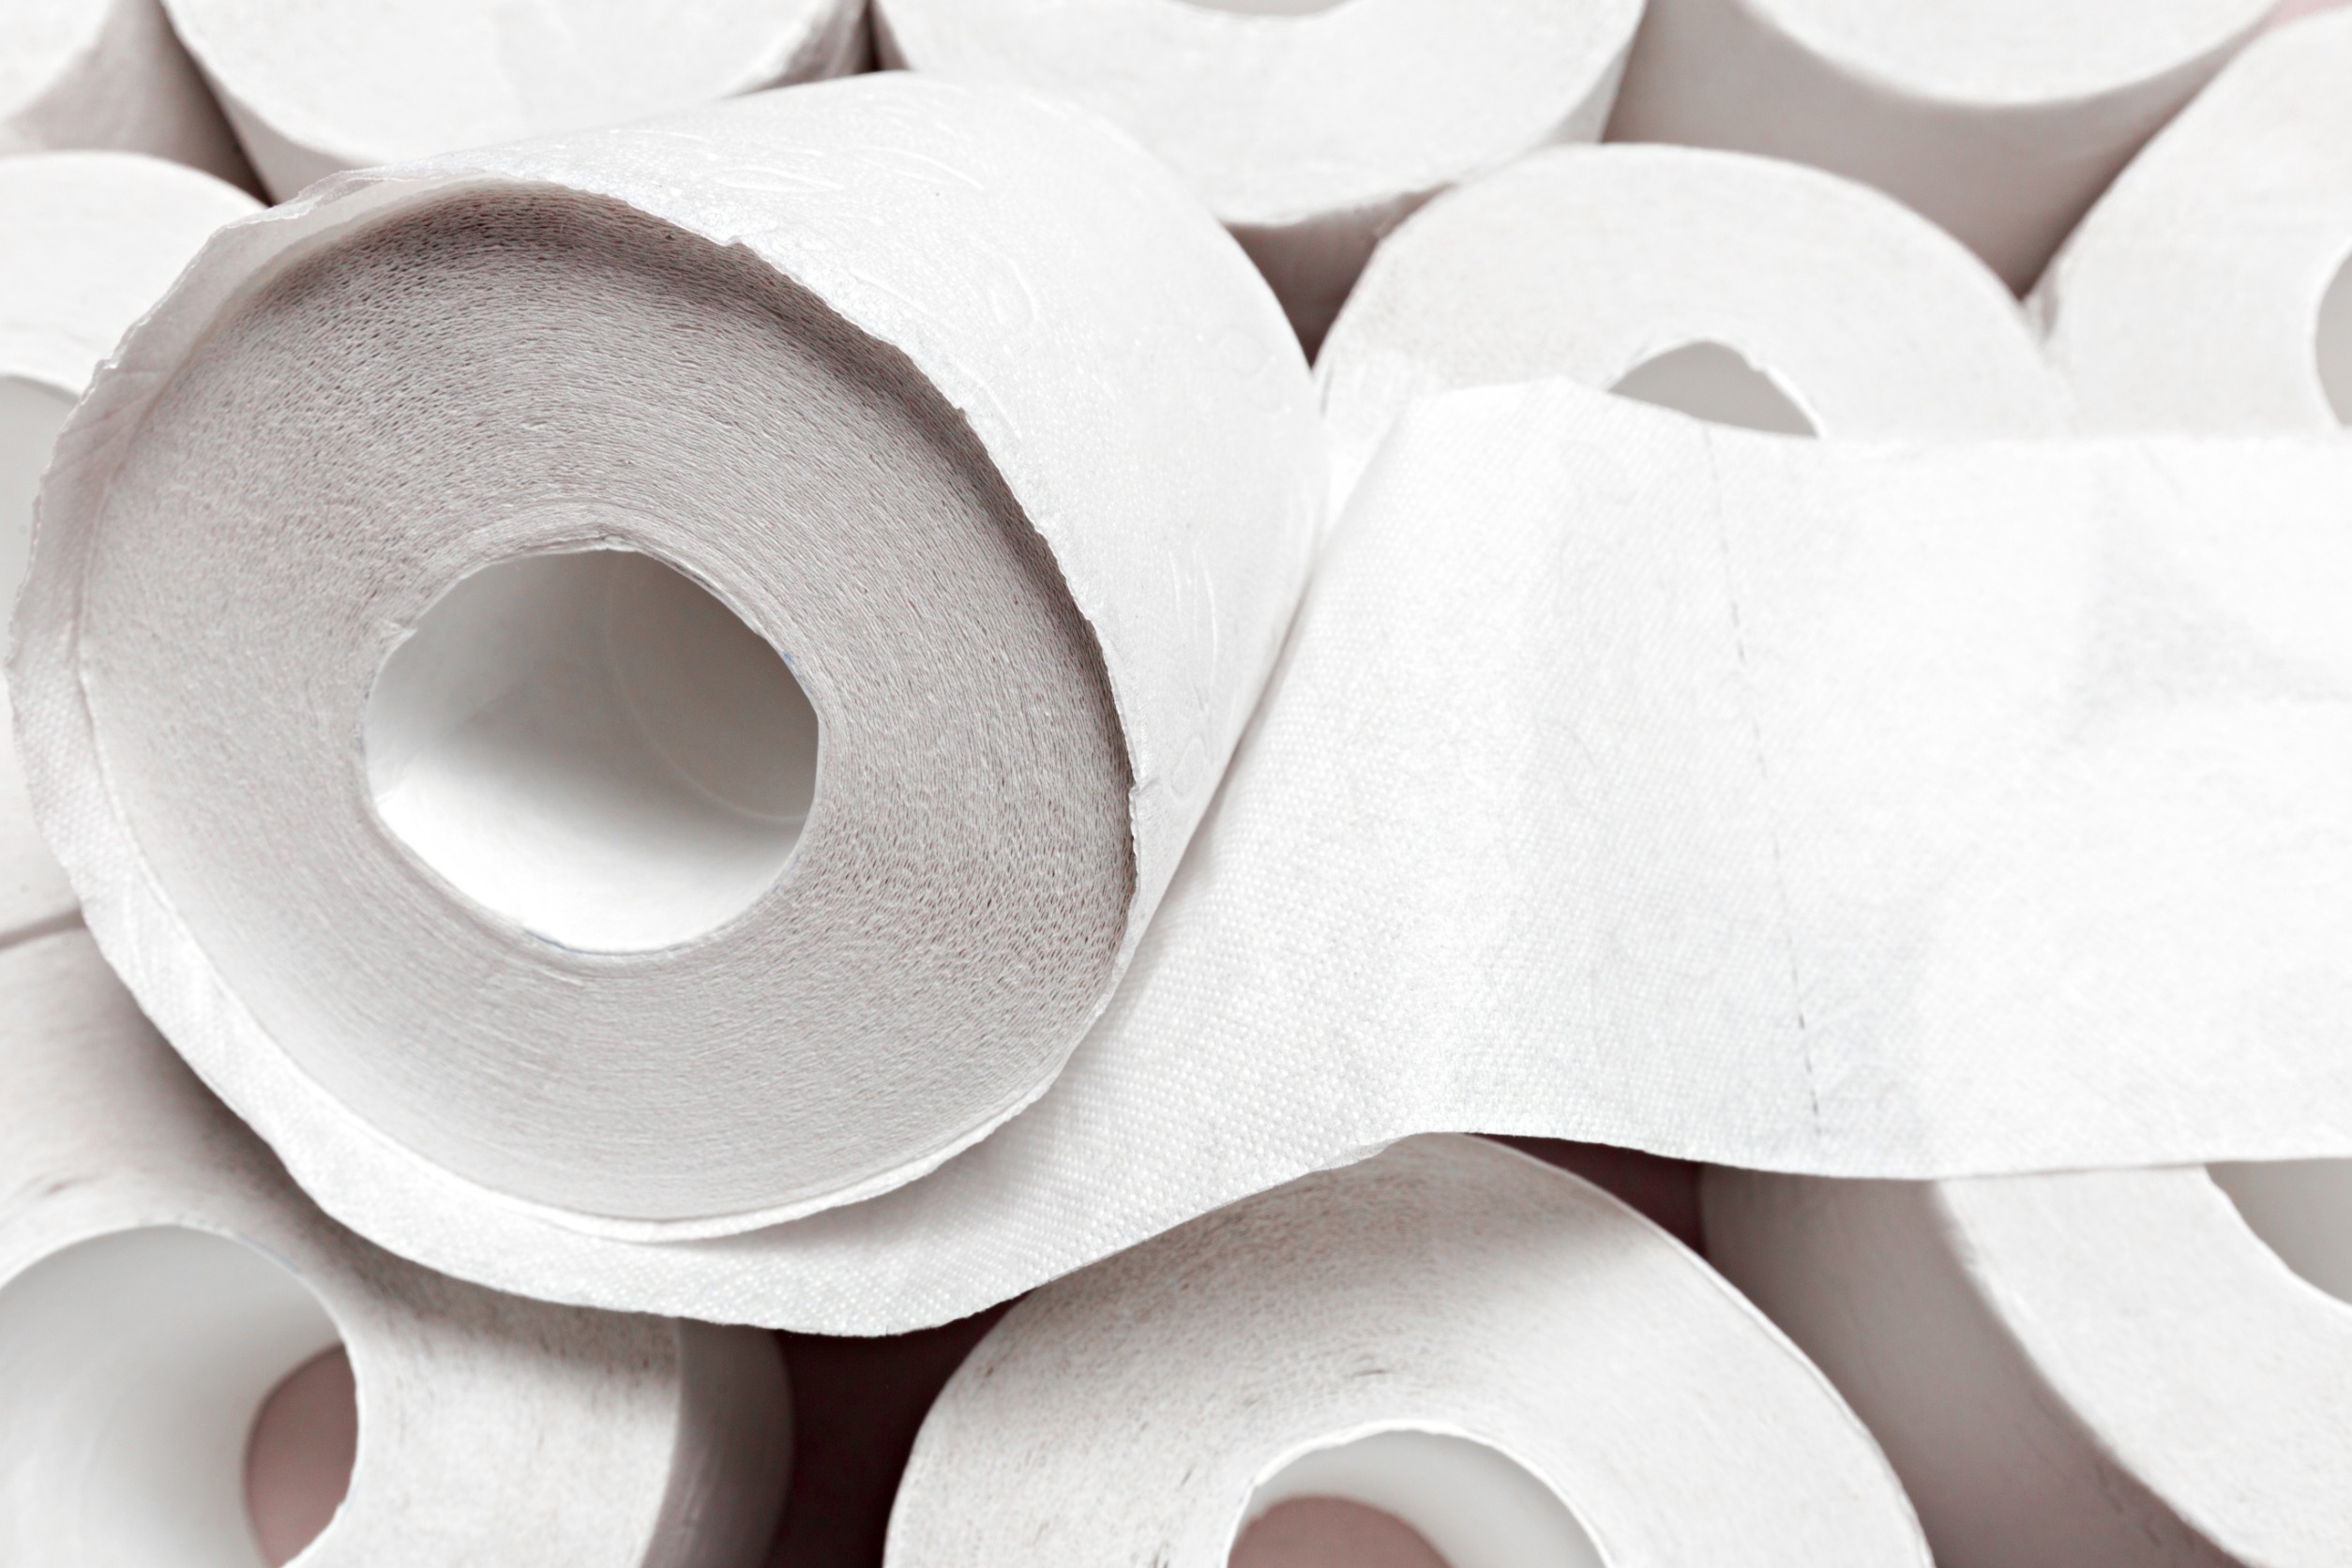 Toilet paper has out preformed inflation since the '60s